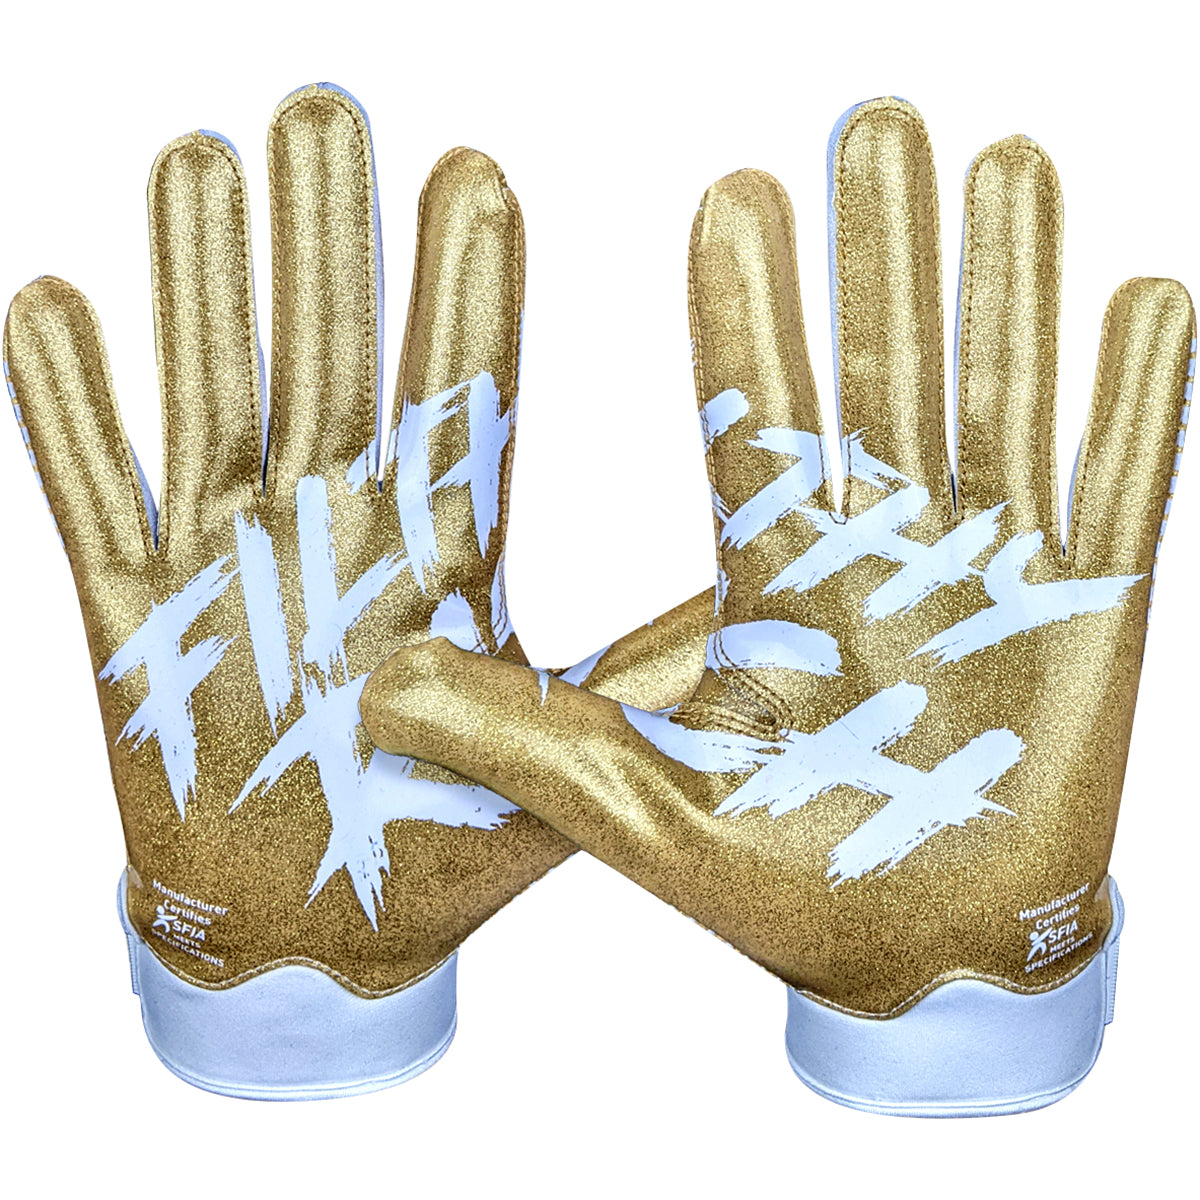 Battle Sports Youth Filthy Rich Doom 1.0 Football Receiver Gloves - Gold Battle Sports